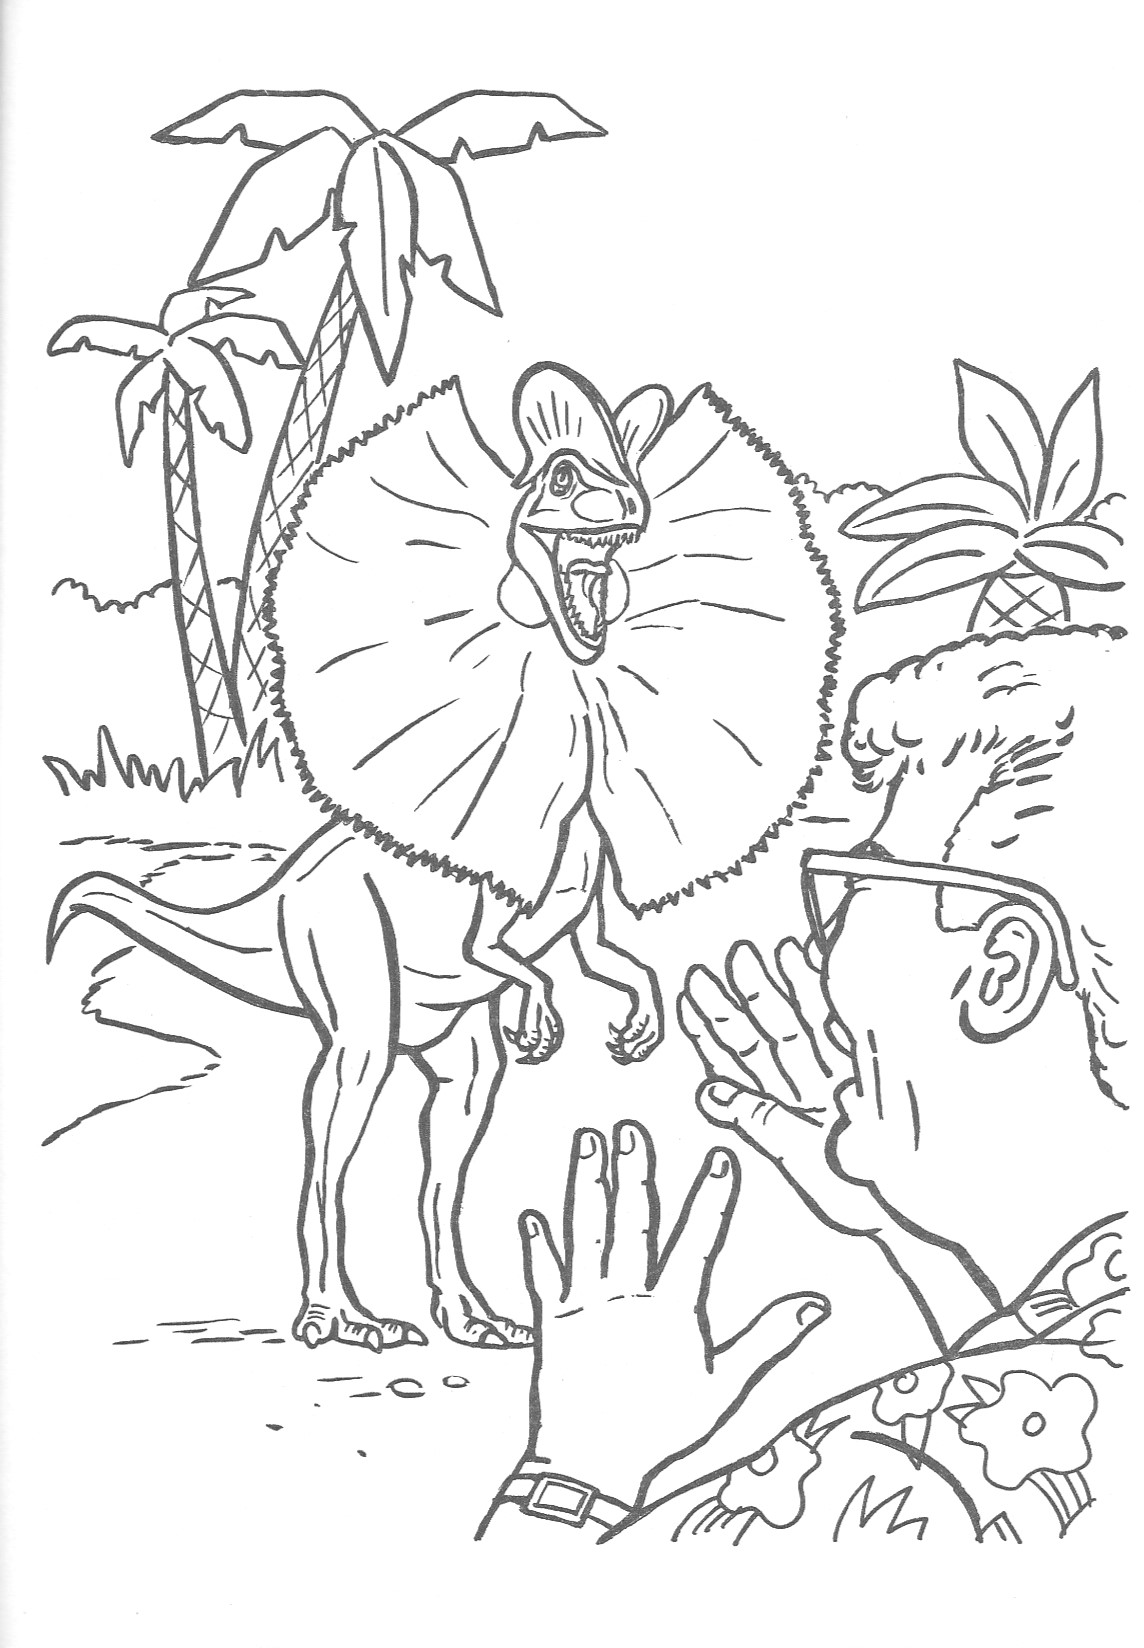 jurassic-park-official-coloring-page-jurassic-park-photo-43330803